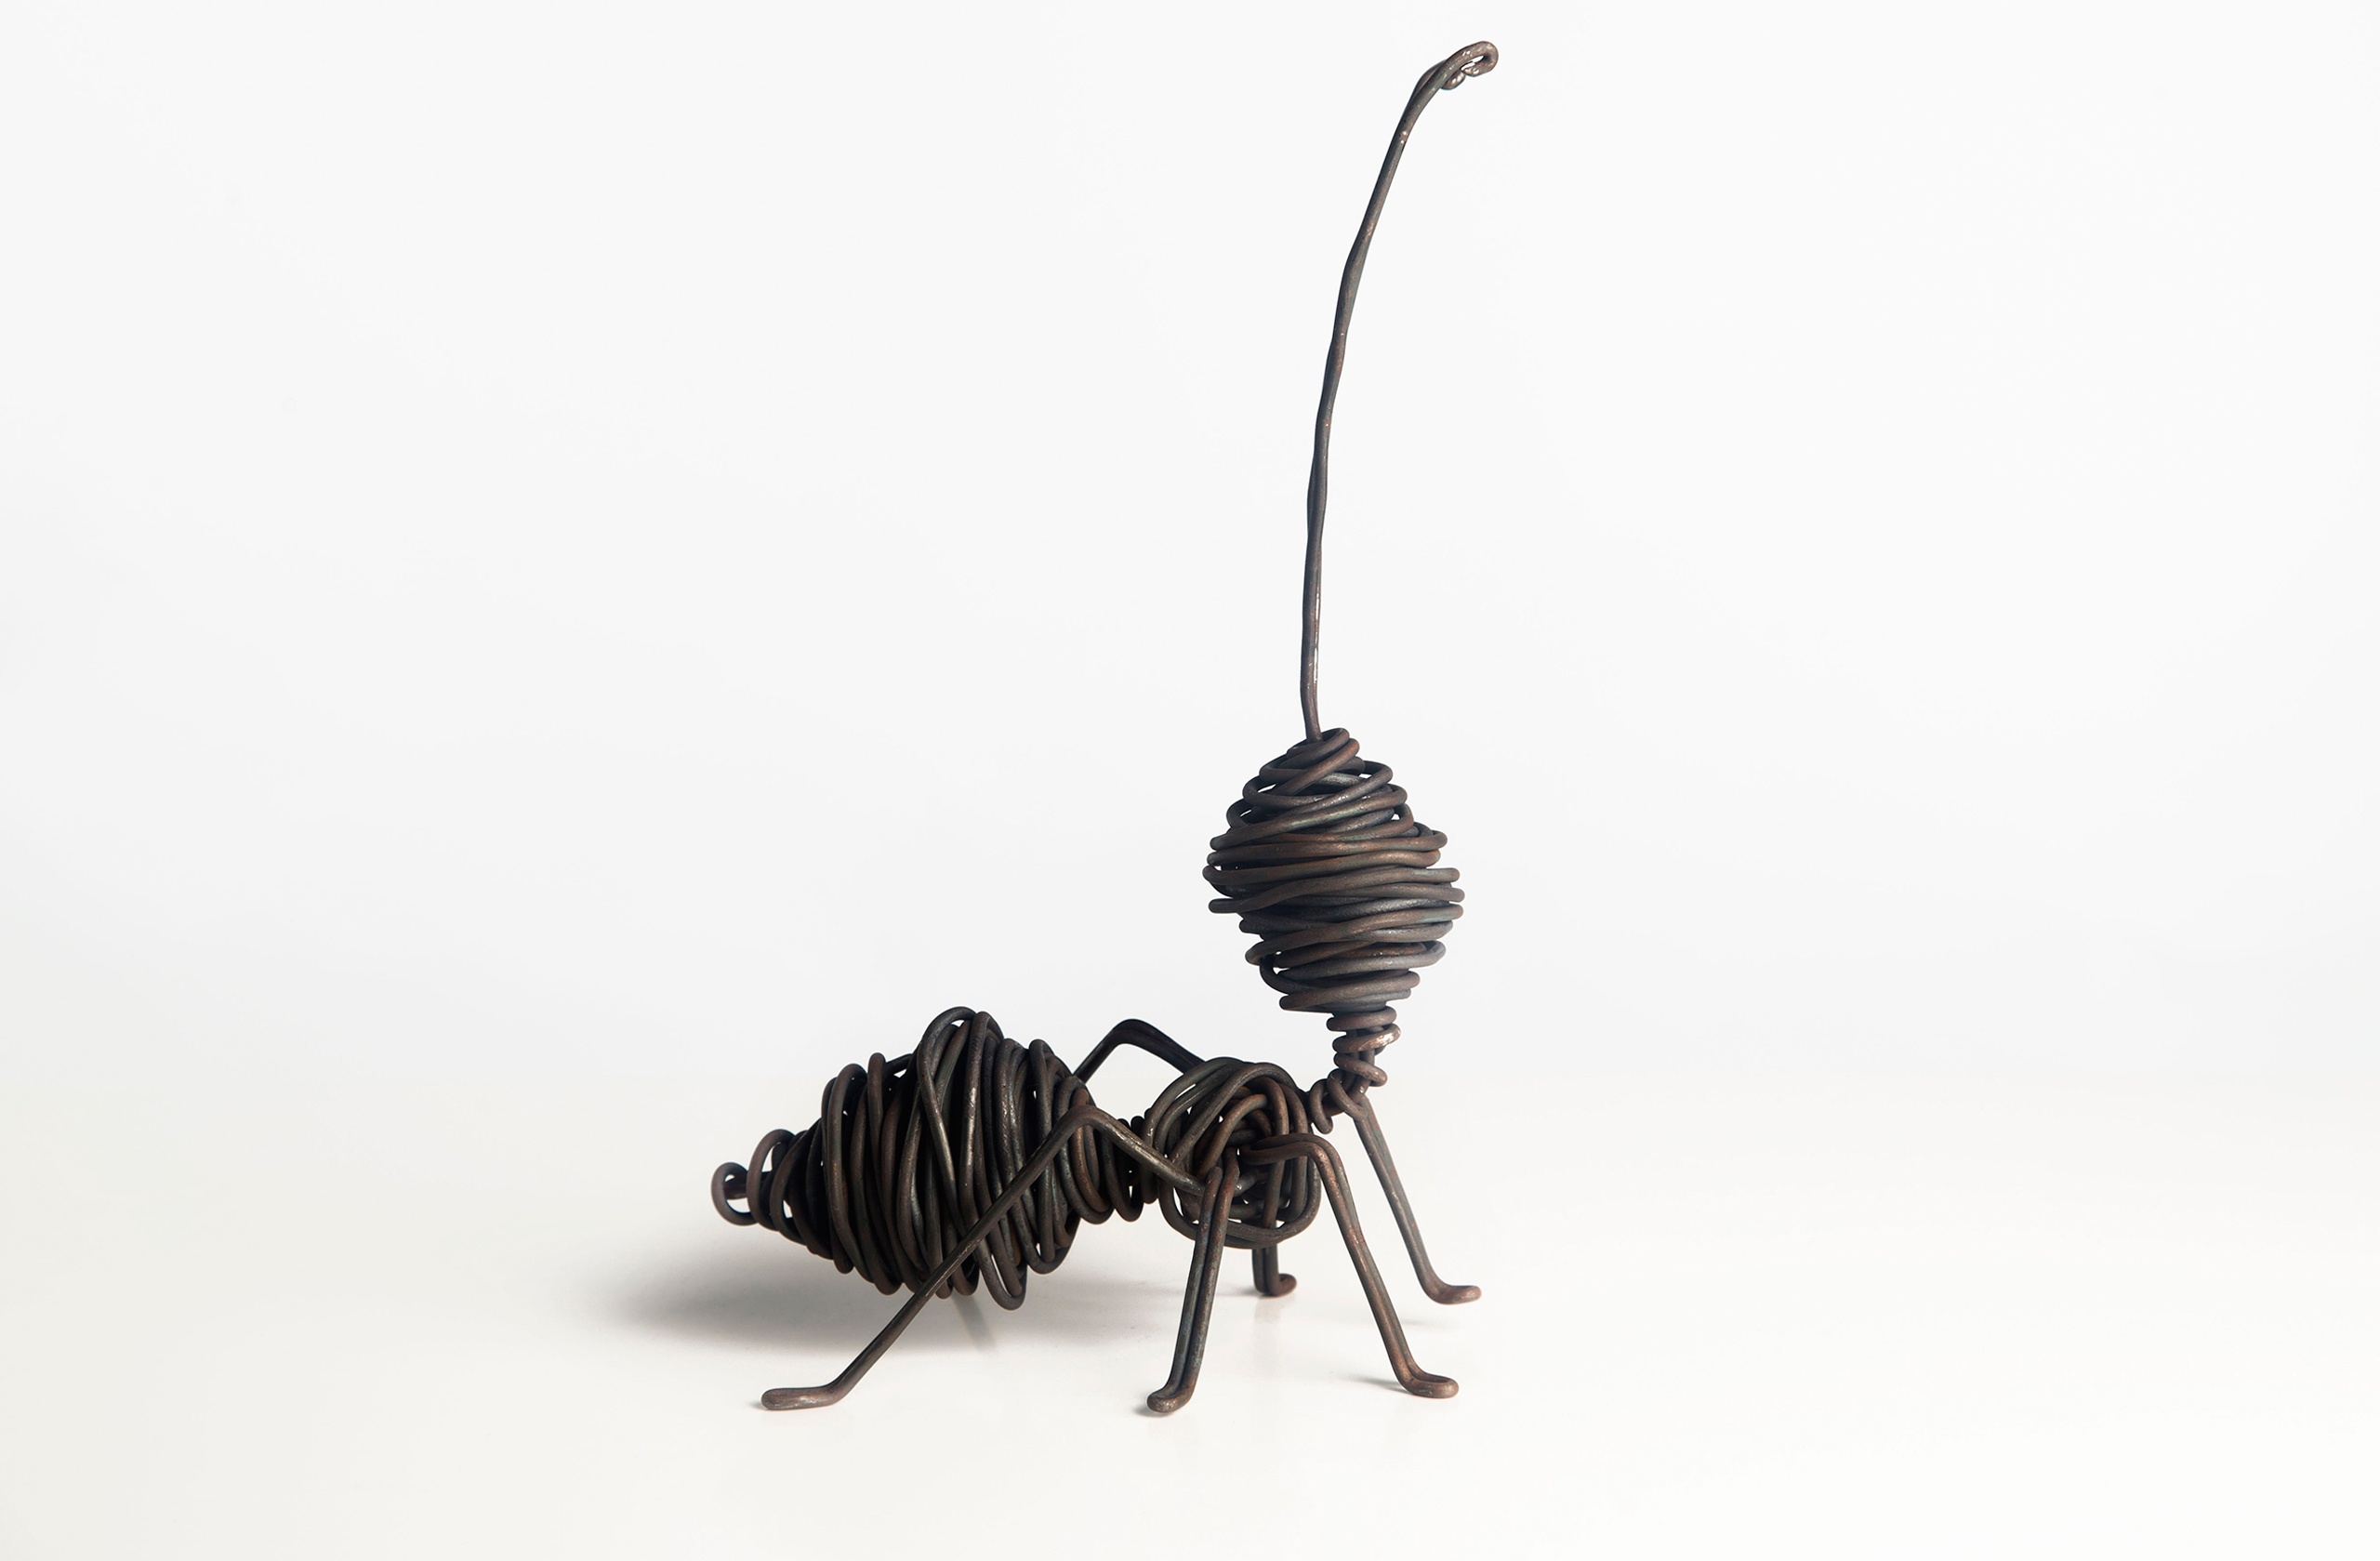 OBJECTS / SCULPTURES